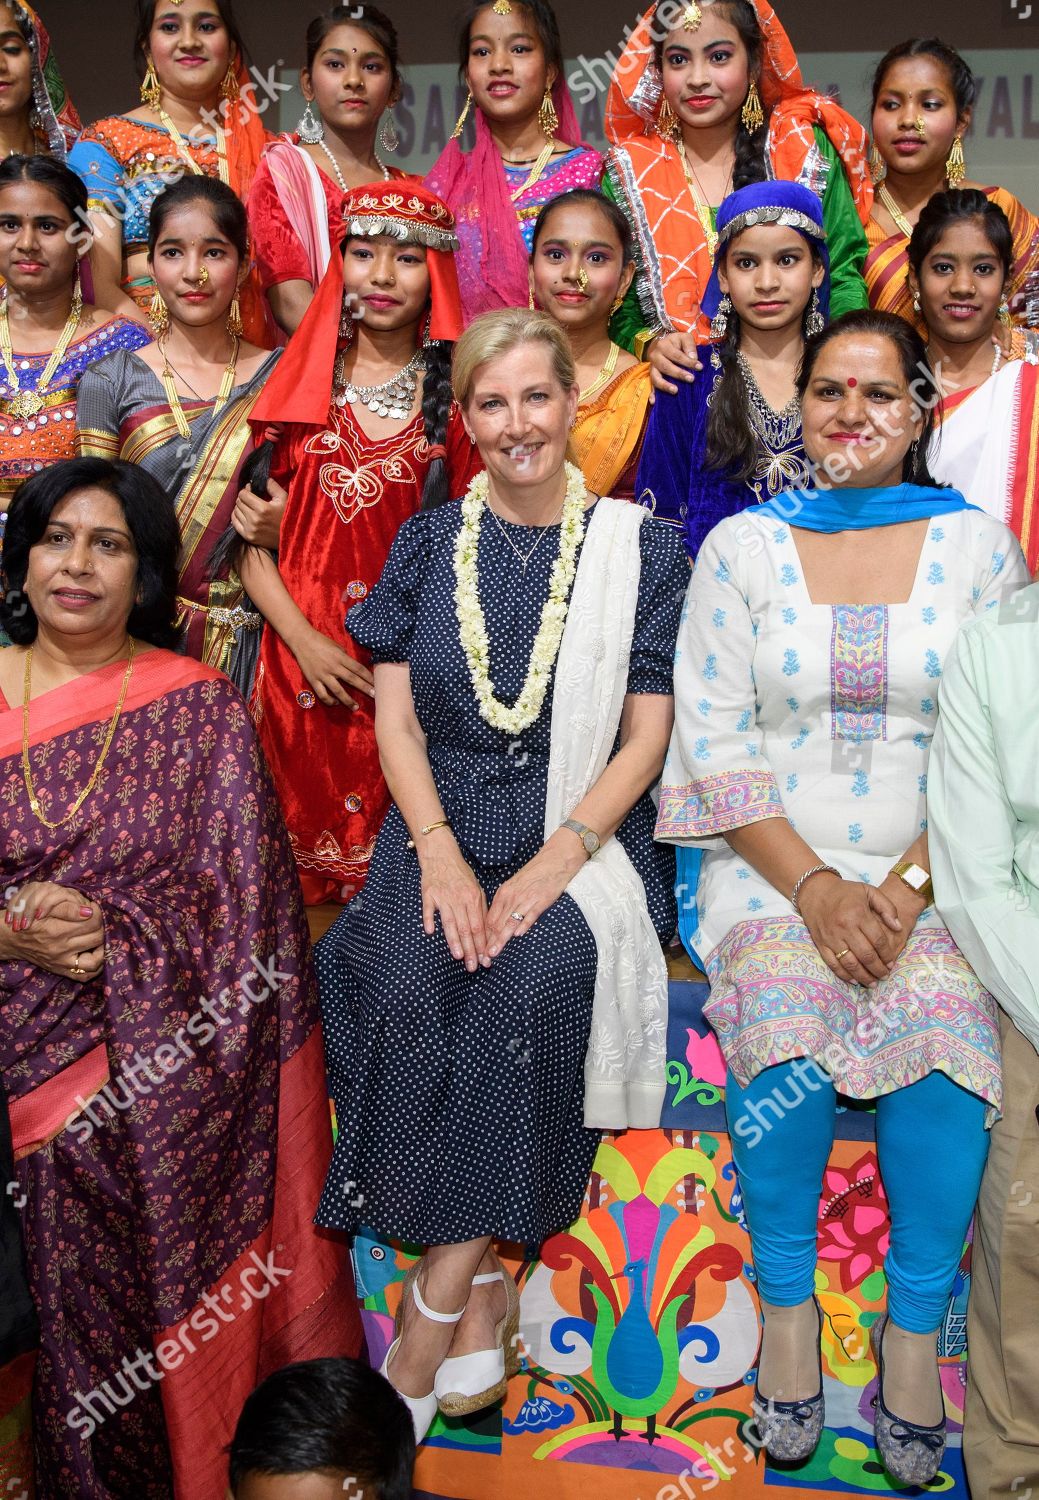 sophie-countess-of-wessex-visit-to-india-shutterstock-editorial-10227195bu.jpg